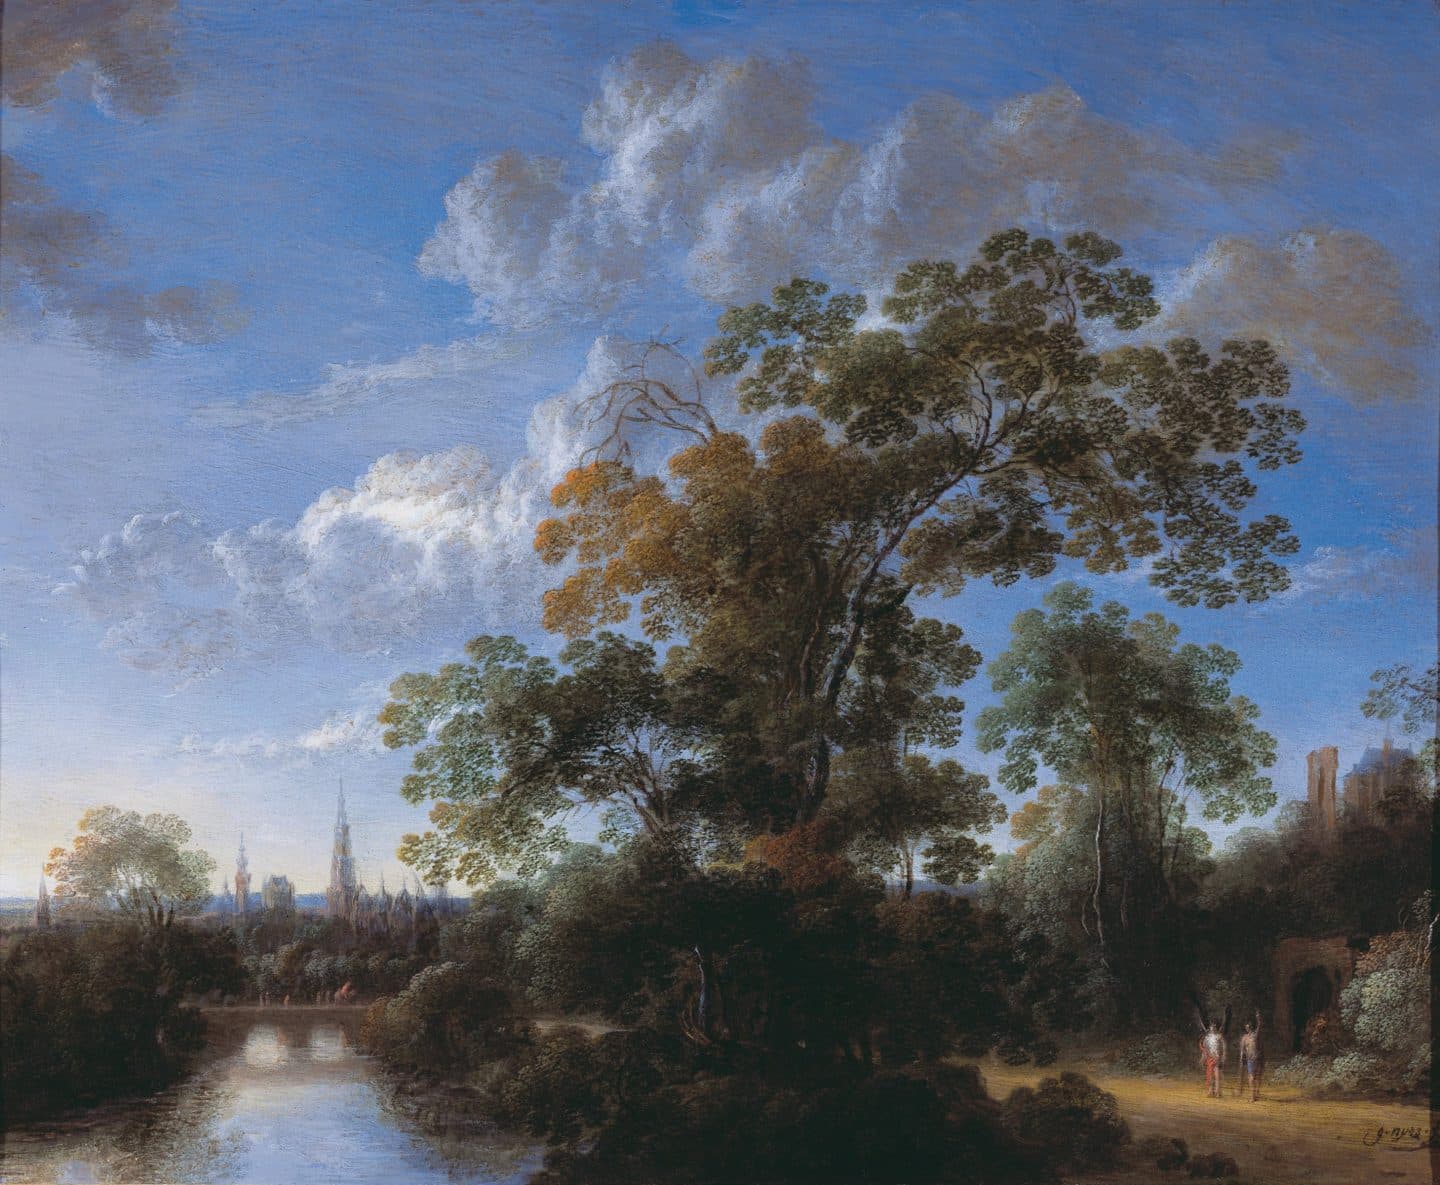 Gillis Neyts, Landscape with Tobias and the Angel, with a View of Antwerp in the Background, 1660s, oil on copper. Gift of Alfred and Isabel Bader, 2012.